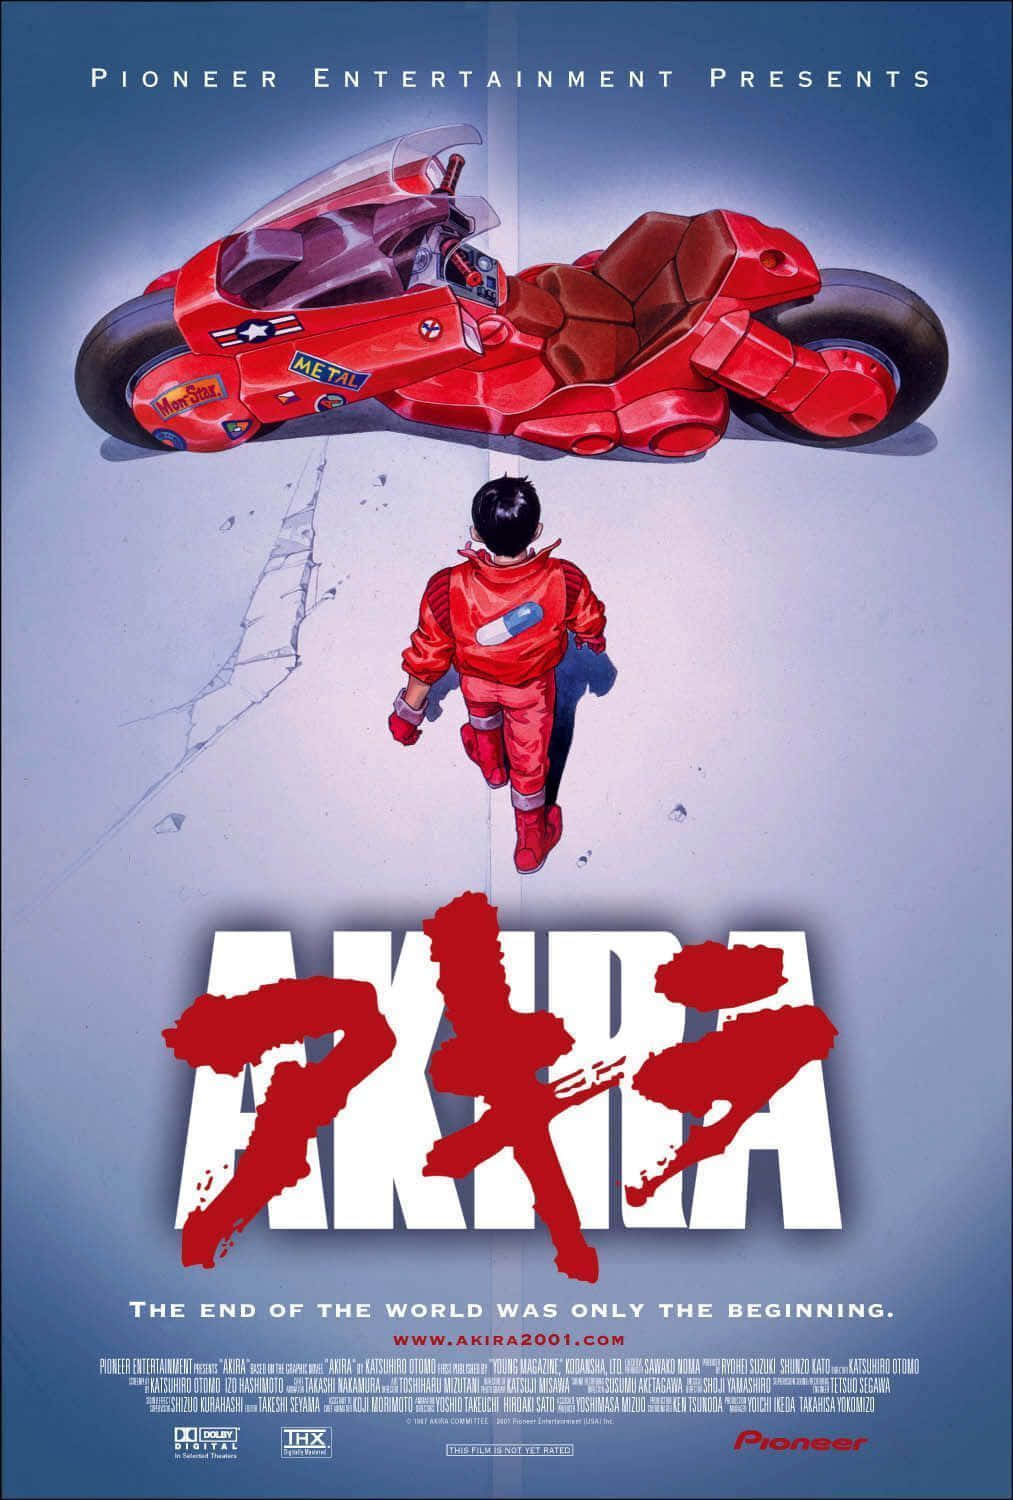 Akira Background From Pioneer Entertainment